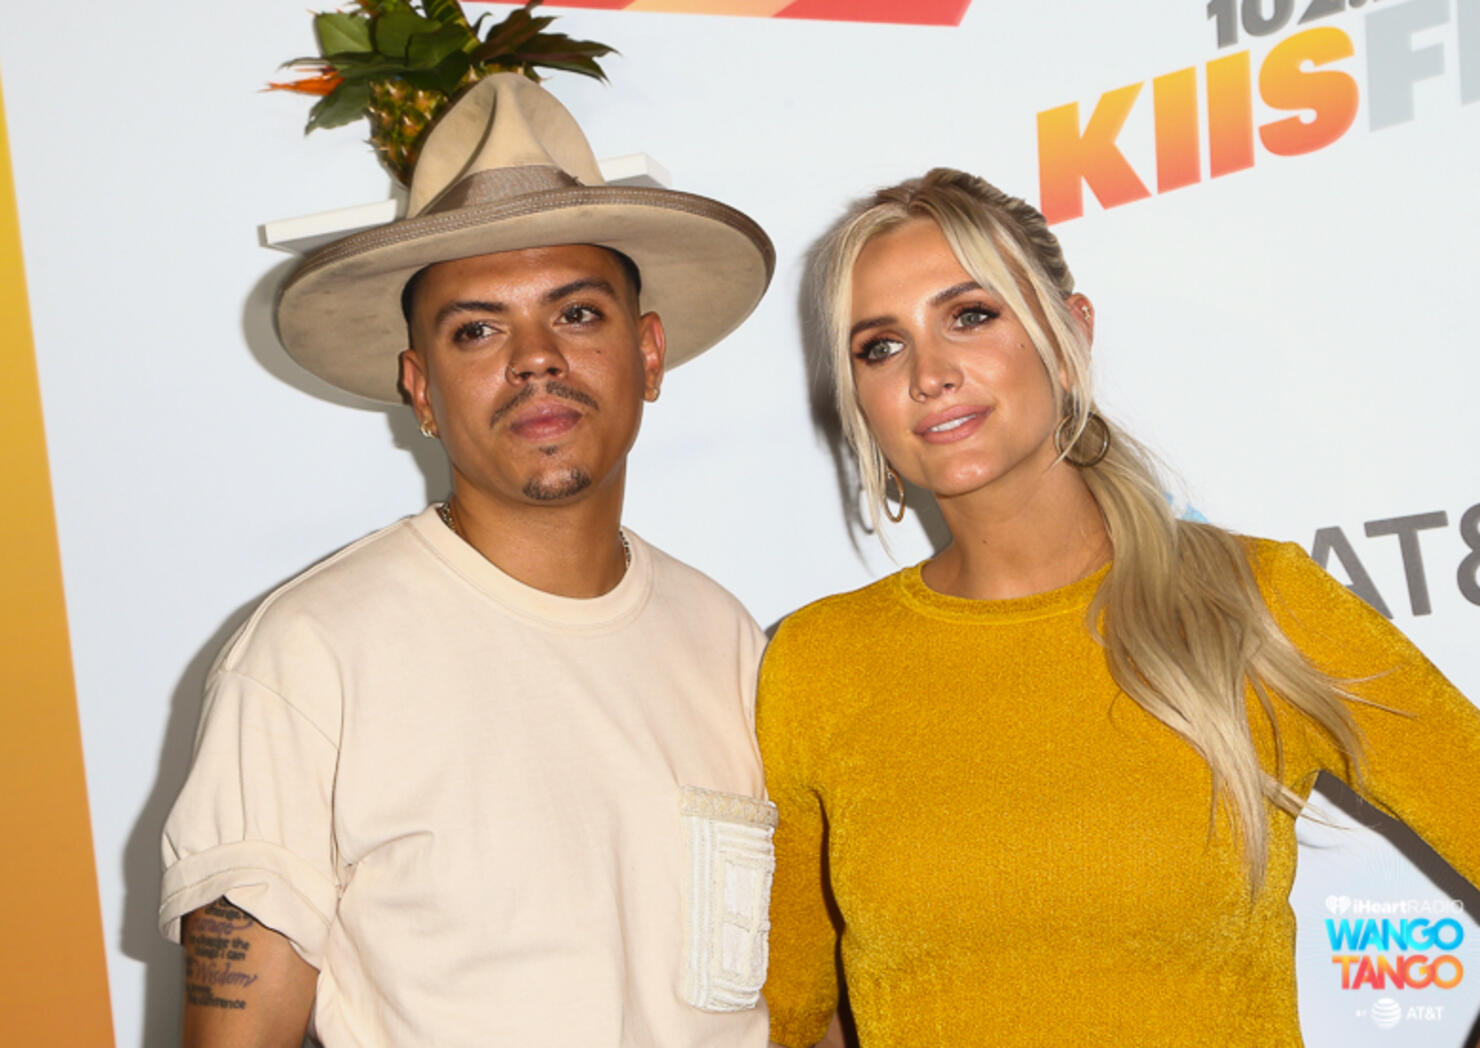  Evan Ross (L) and Ashlee Simpson arrive at the 2018 iHeartRadio Wango Tango by AT&T at Banc of California Stadium on June 2, 2018 in Los Angeles, California.